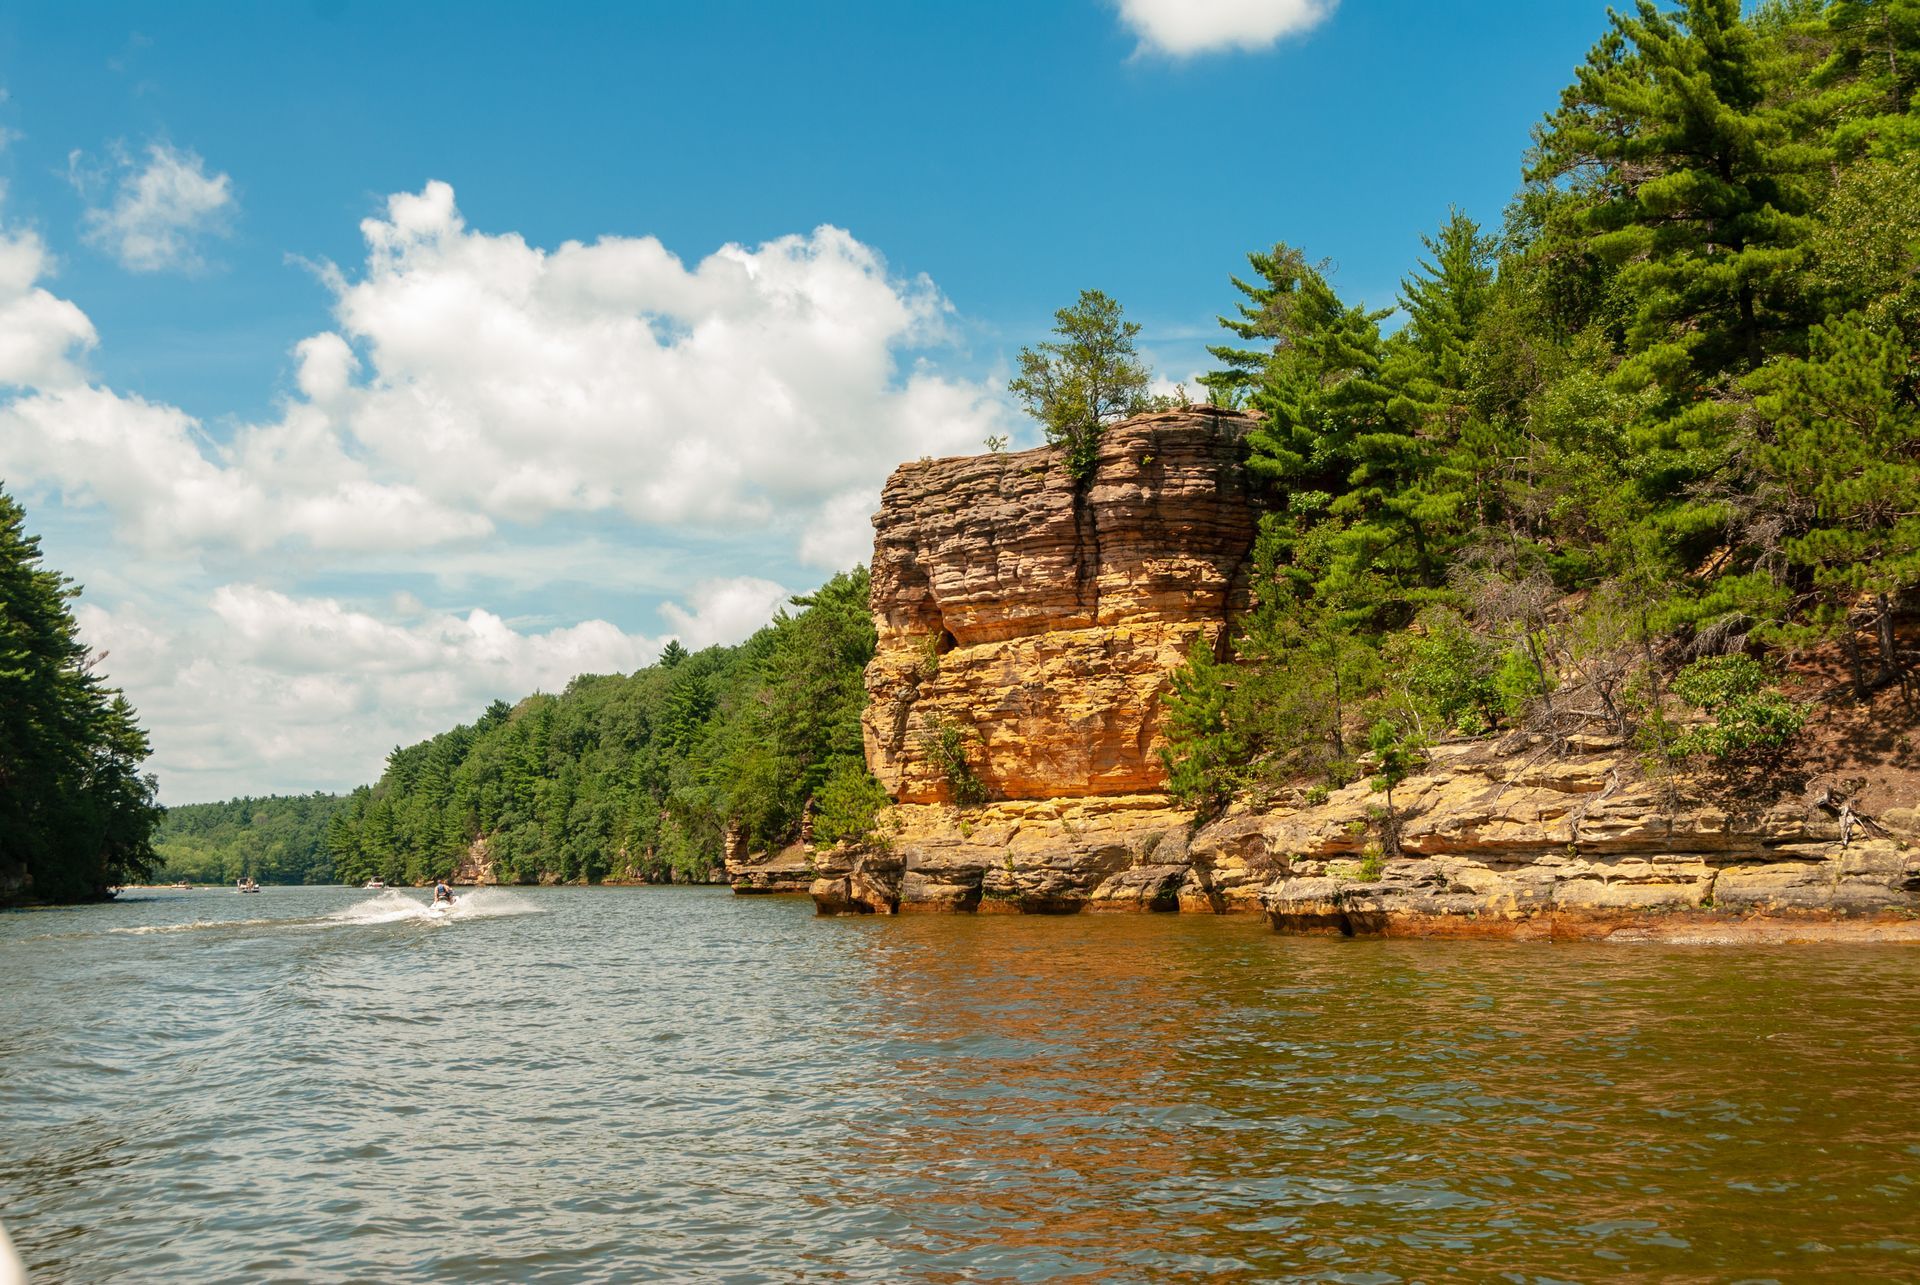 A boat is floating on a lake near a rocky cliff.